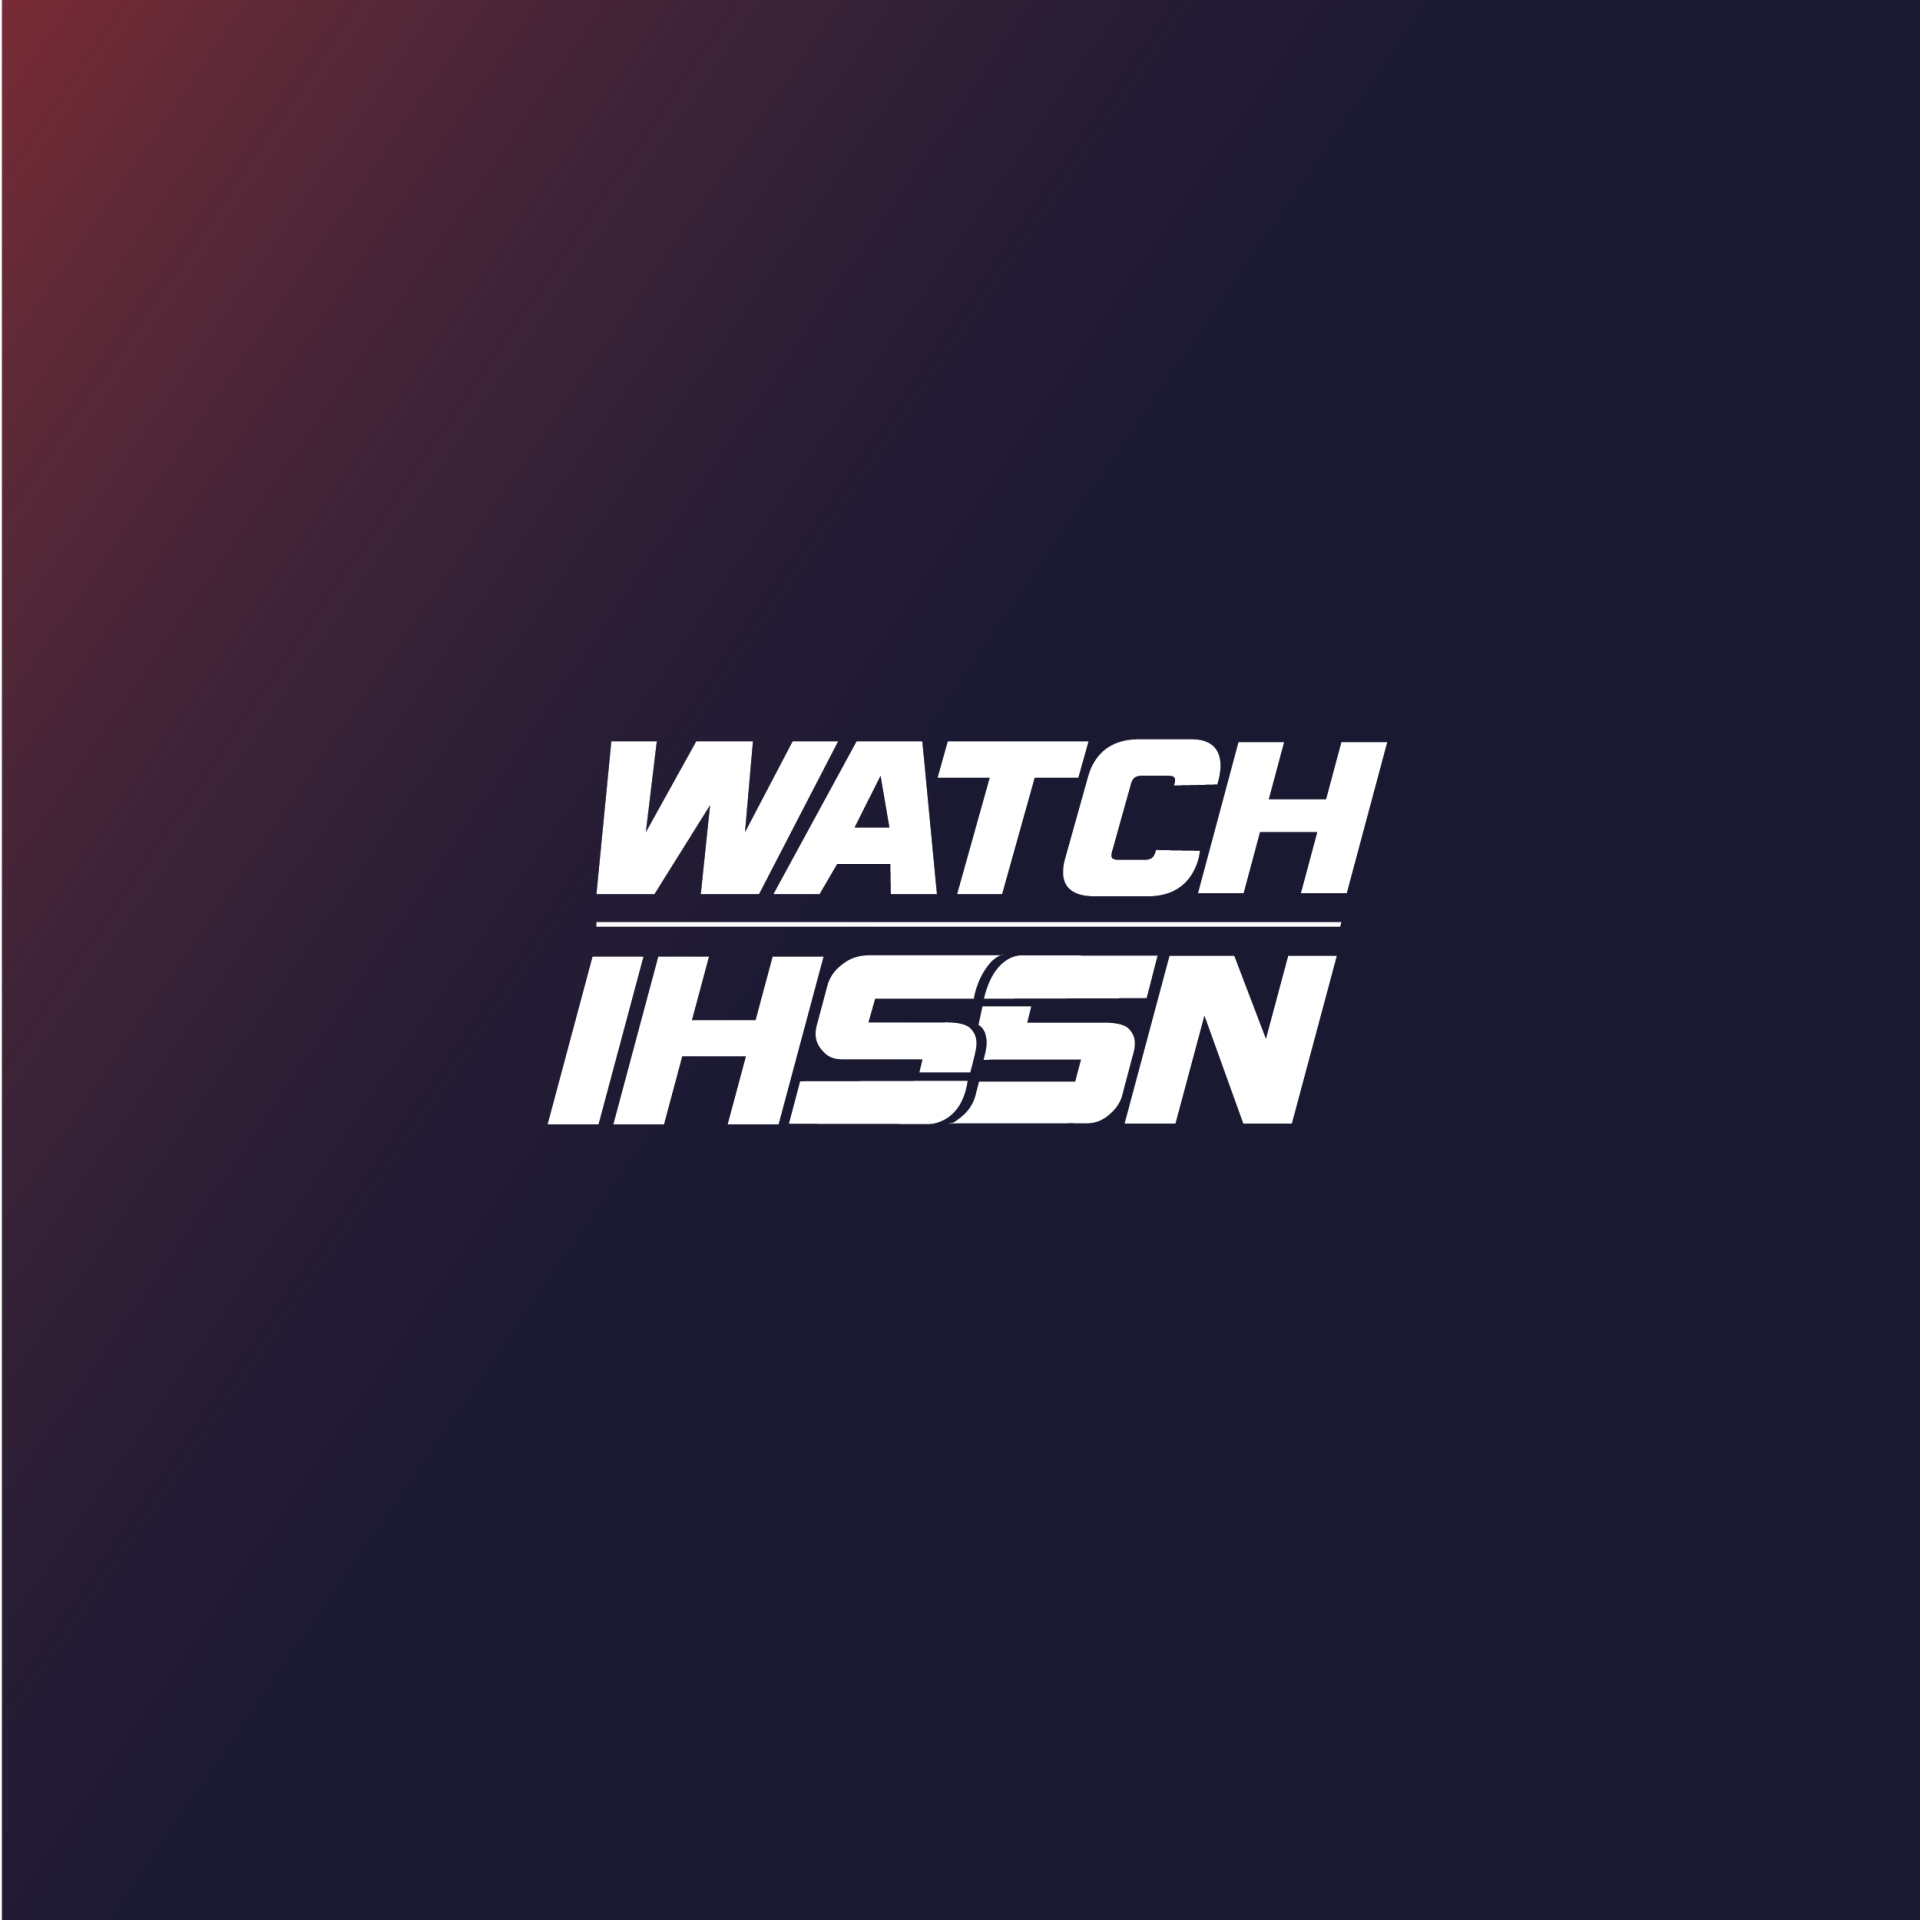 A logo for a company called watch ihssn on a dark blue background.